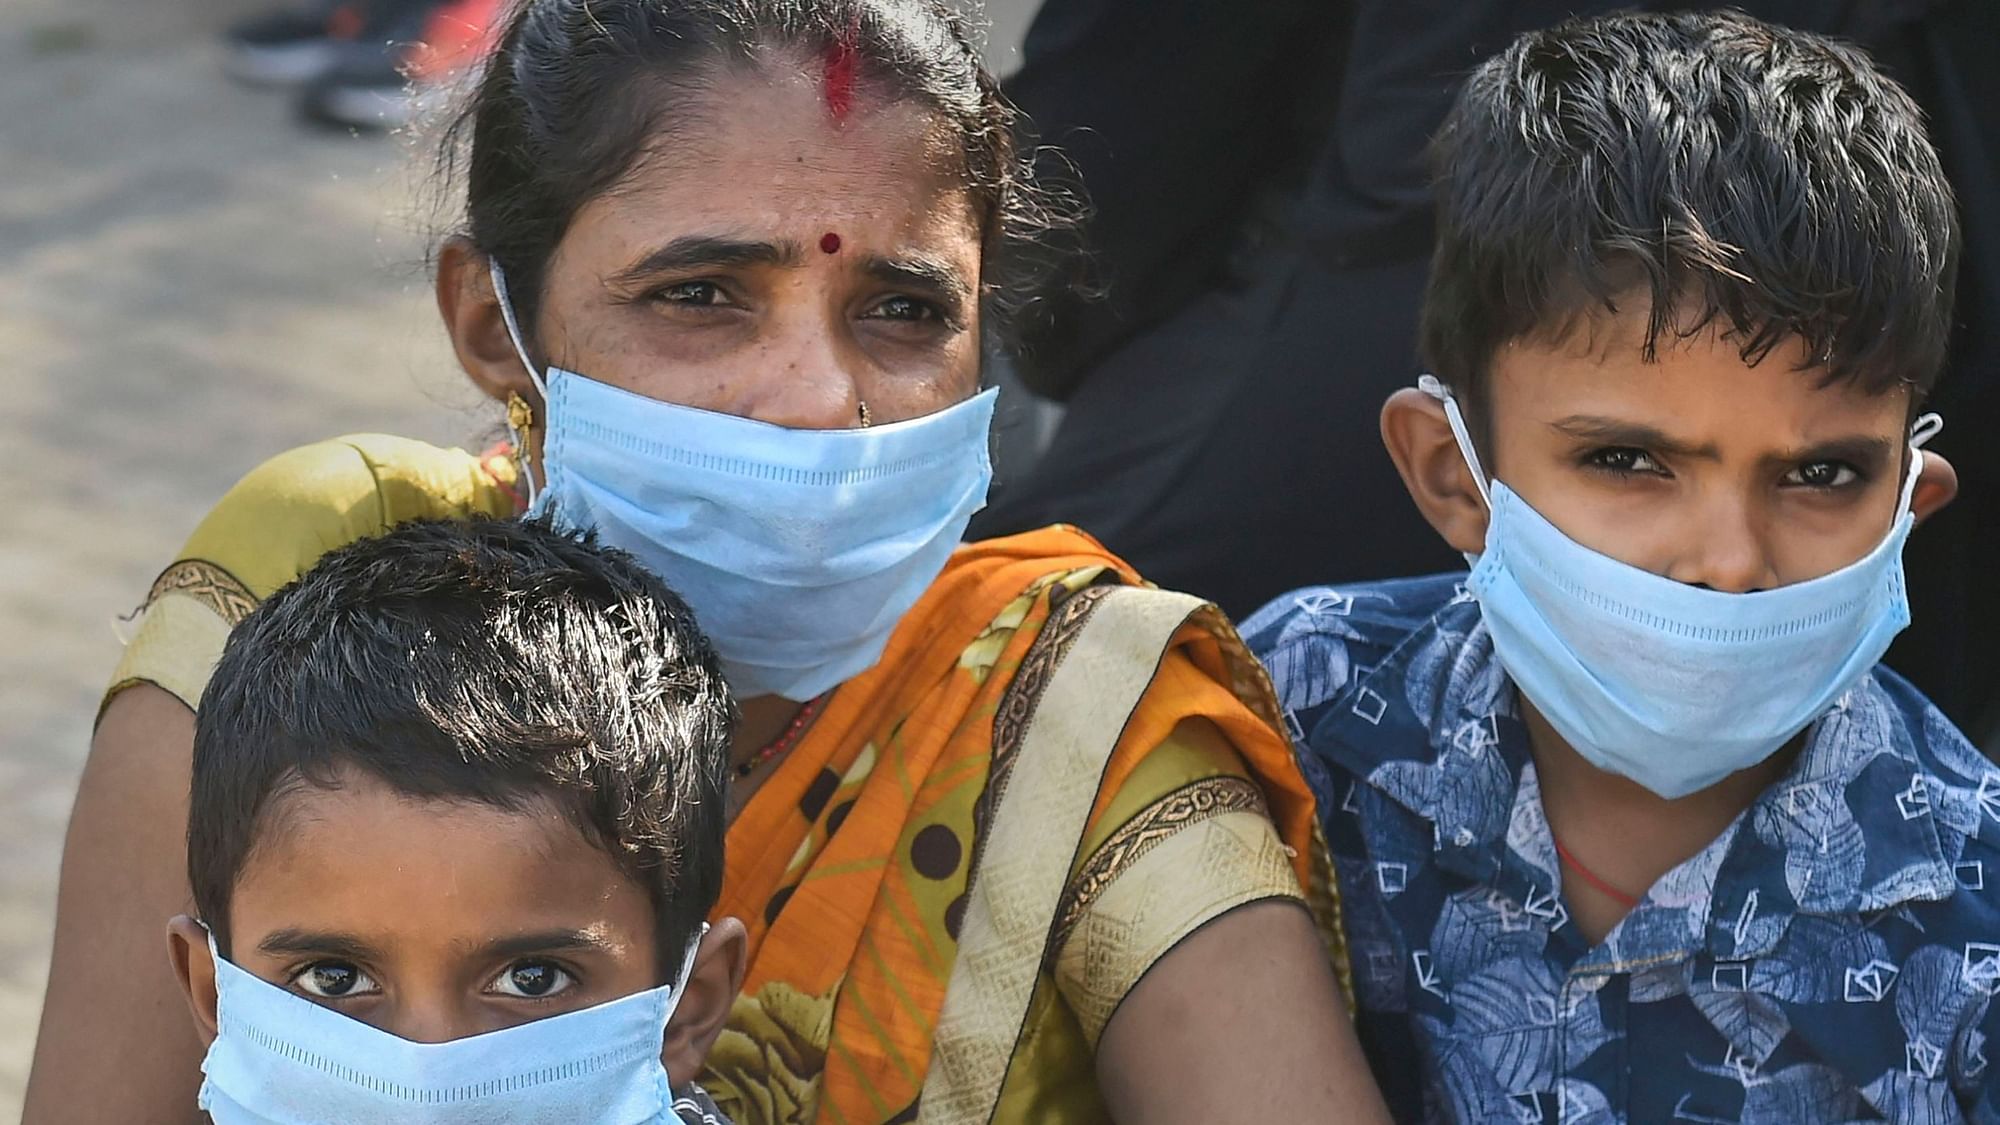 A record 6,977 new coronavirus cases and 154 more fatalities were reported in the last 24 hours in India.